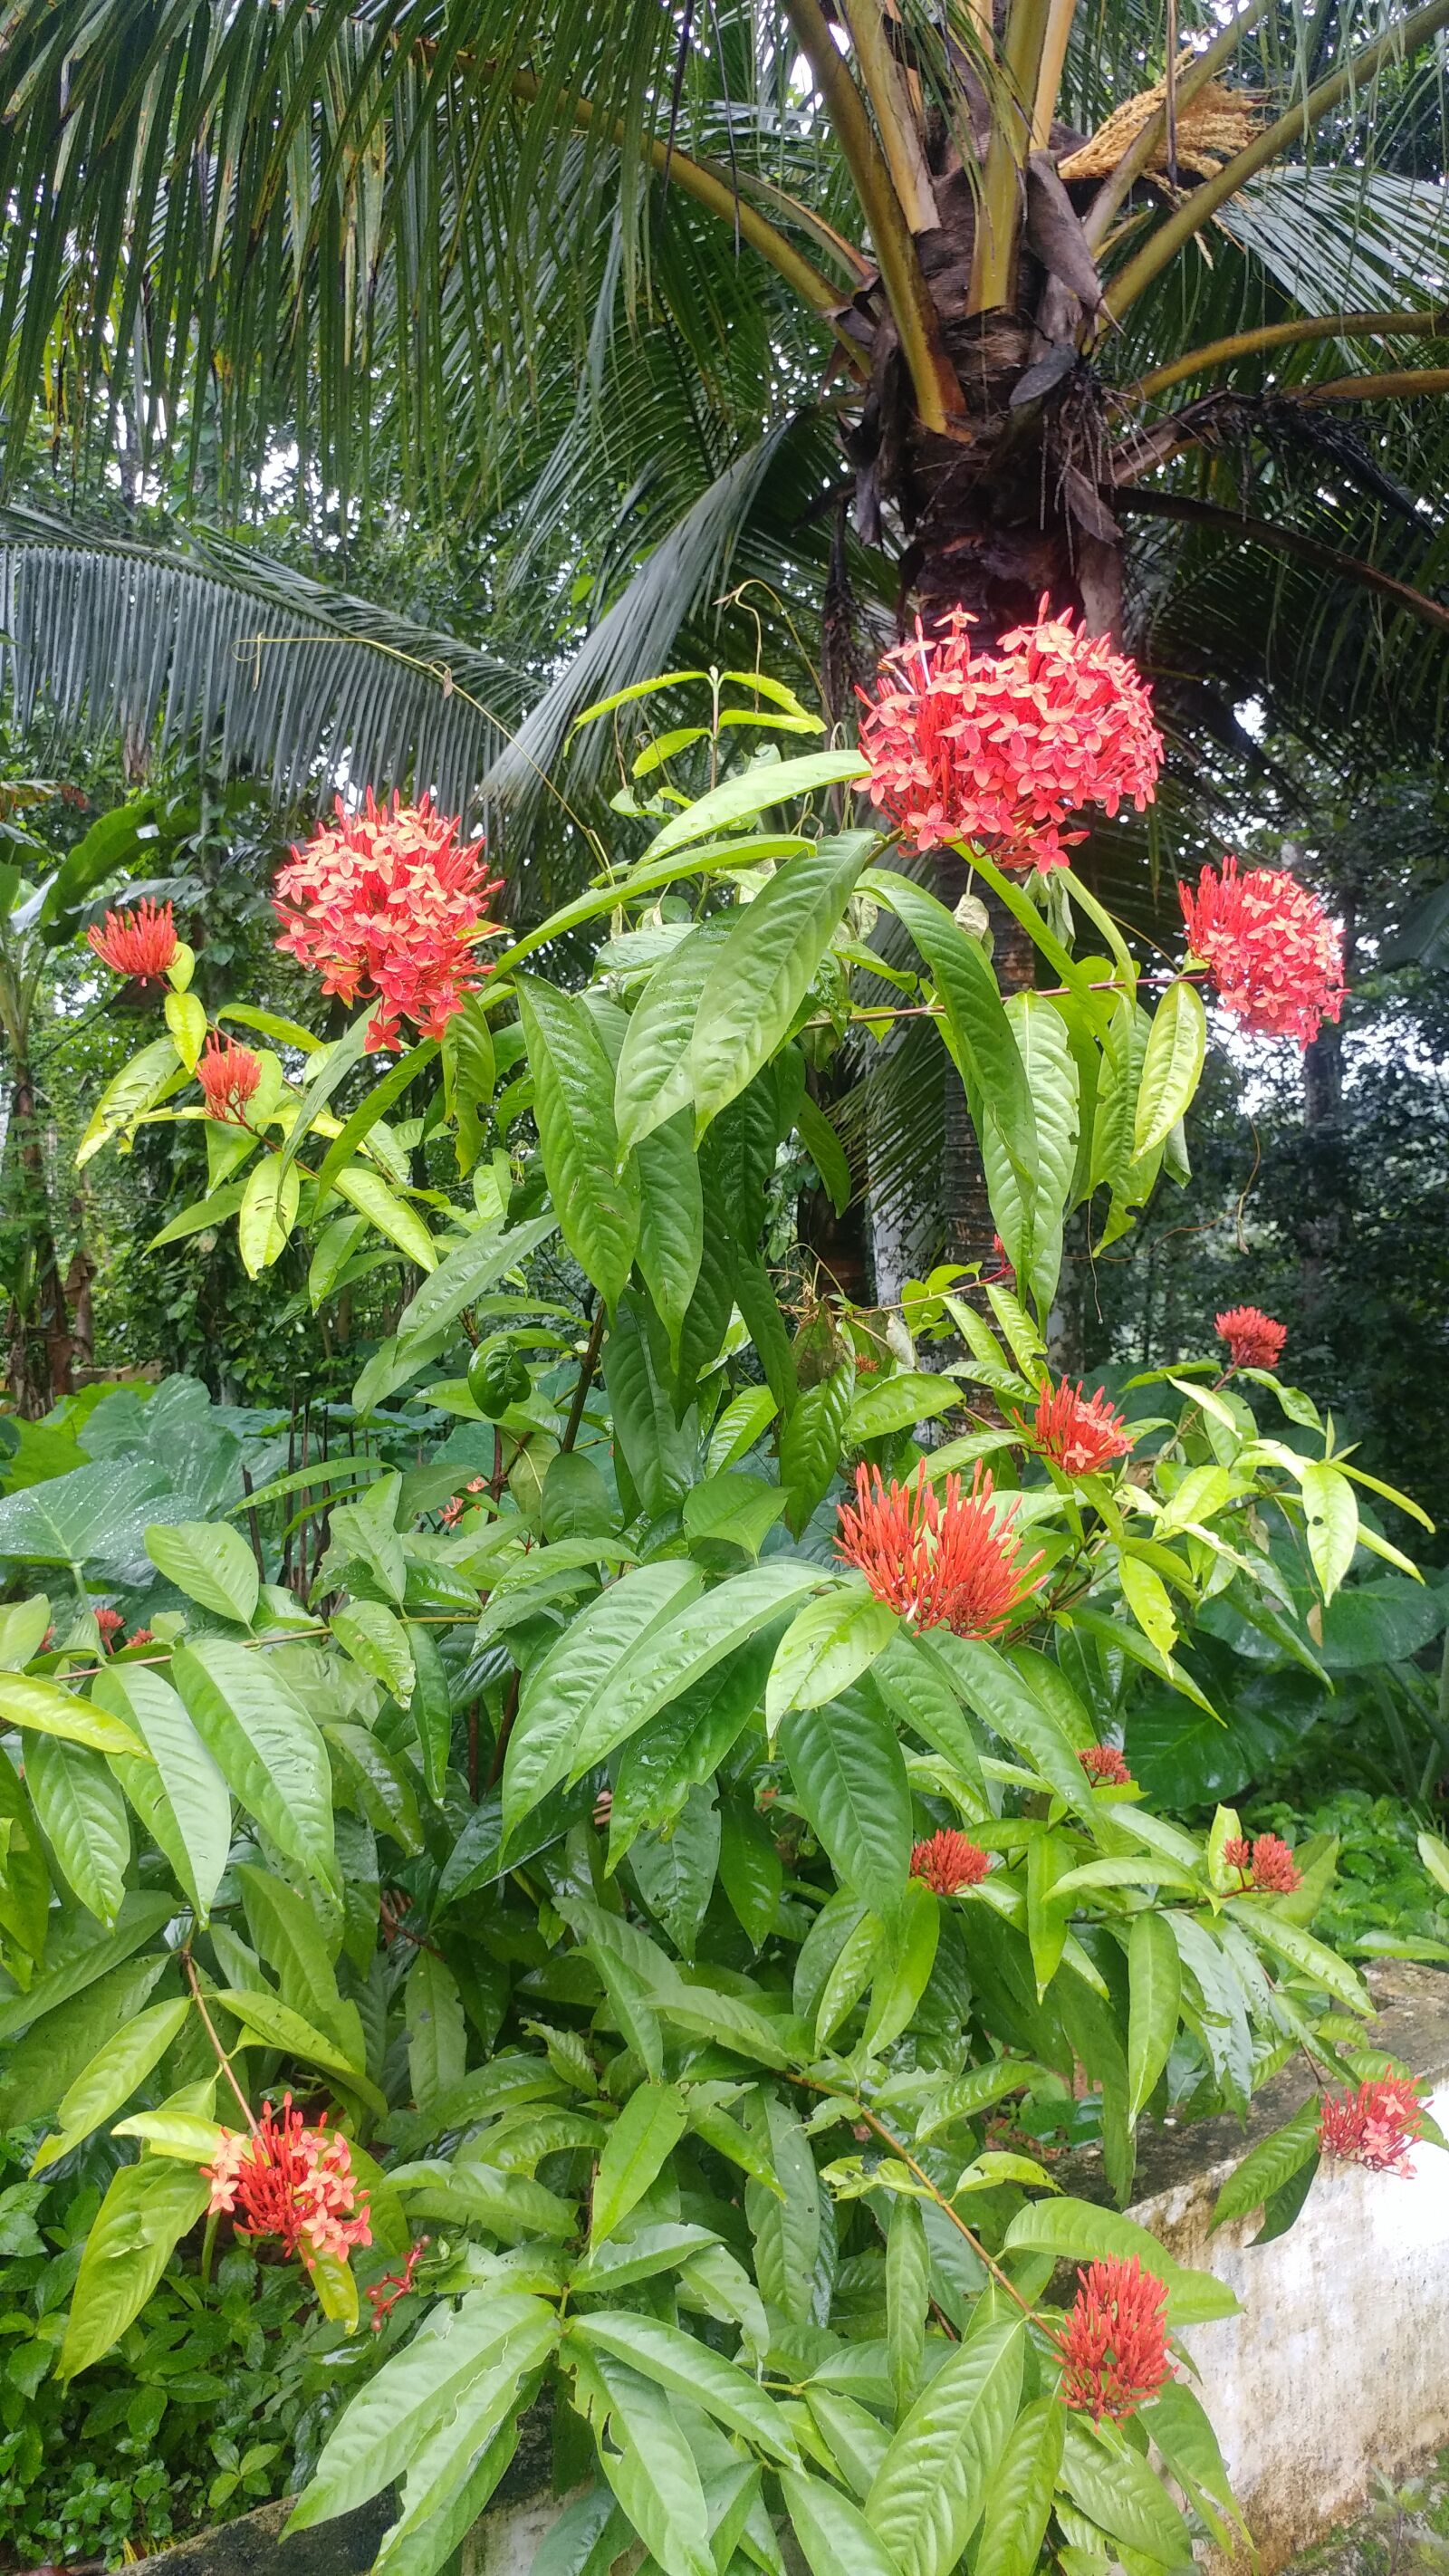 LG G5 SE sample photo. Flowers, red, greenery photography